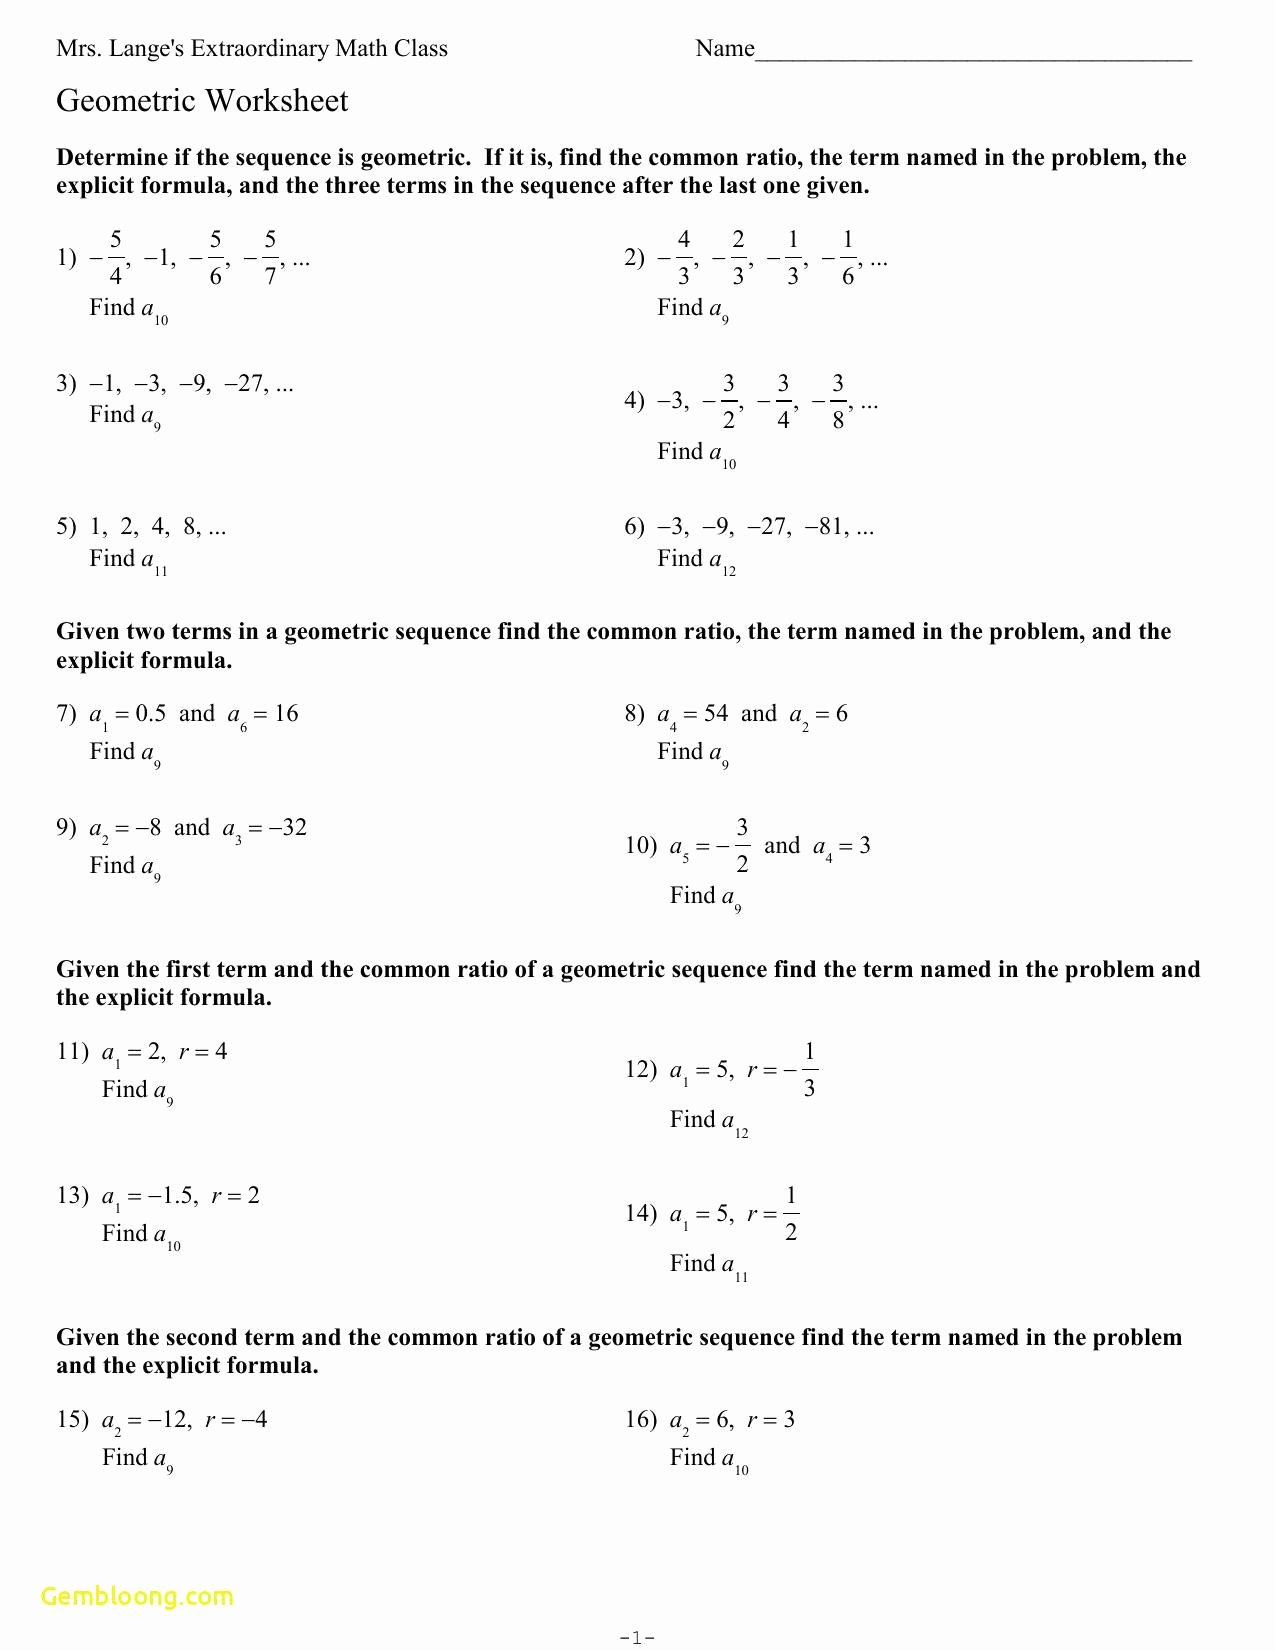 Arithmetic Sequence Worksheet Answers Best Of Geometric Sequences and Series Worksheet Answers